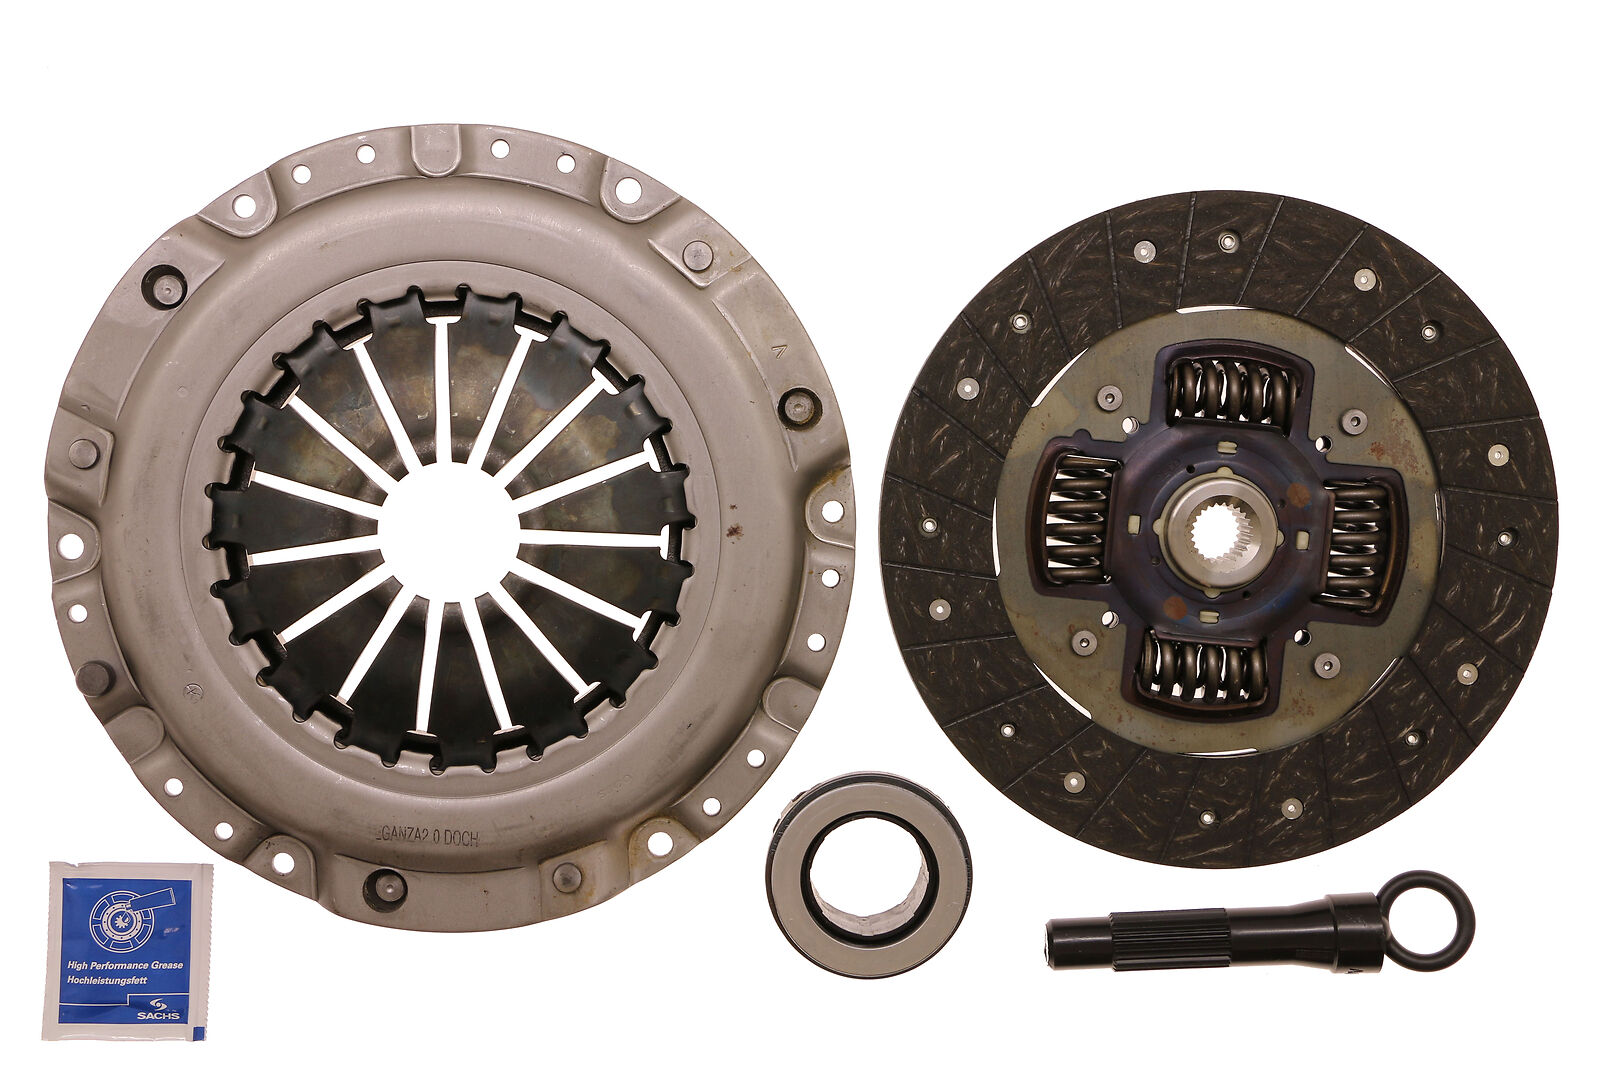  Clutch Kit for Daewoo Leganza 1999 - 2002 & Others SACHSK70267-01